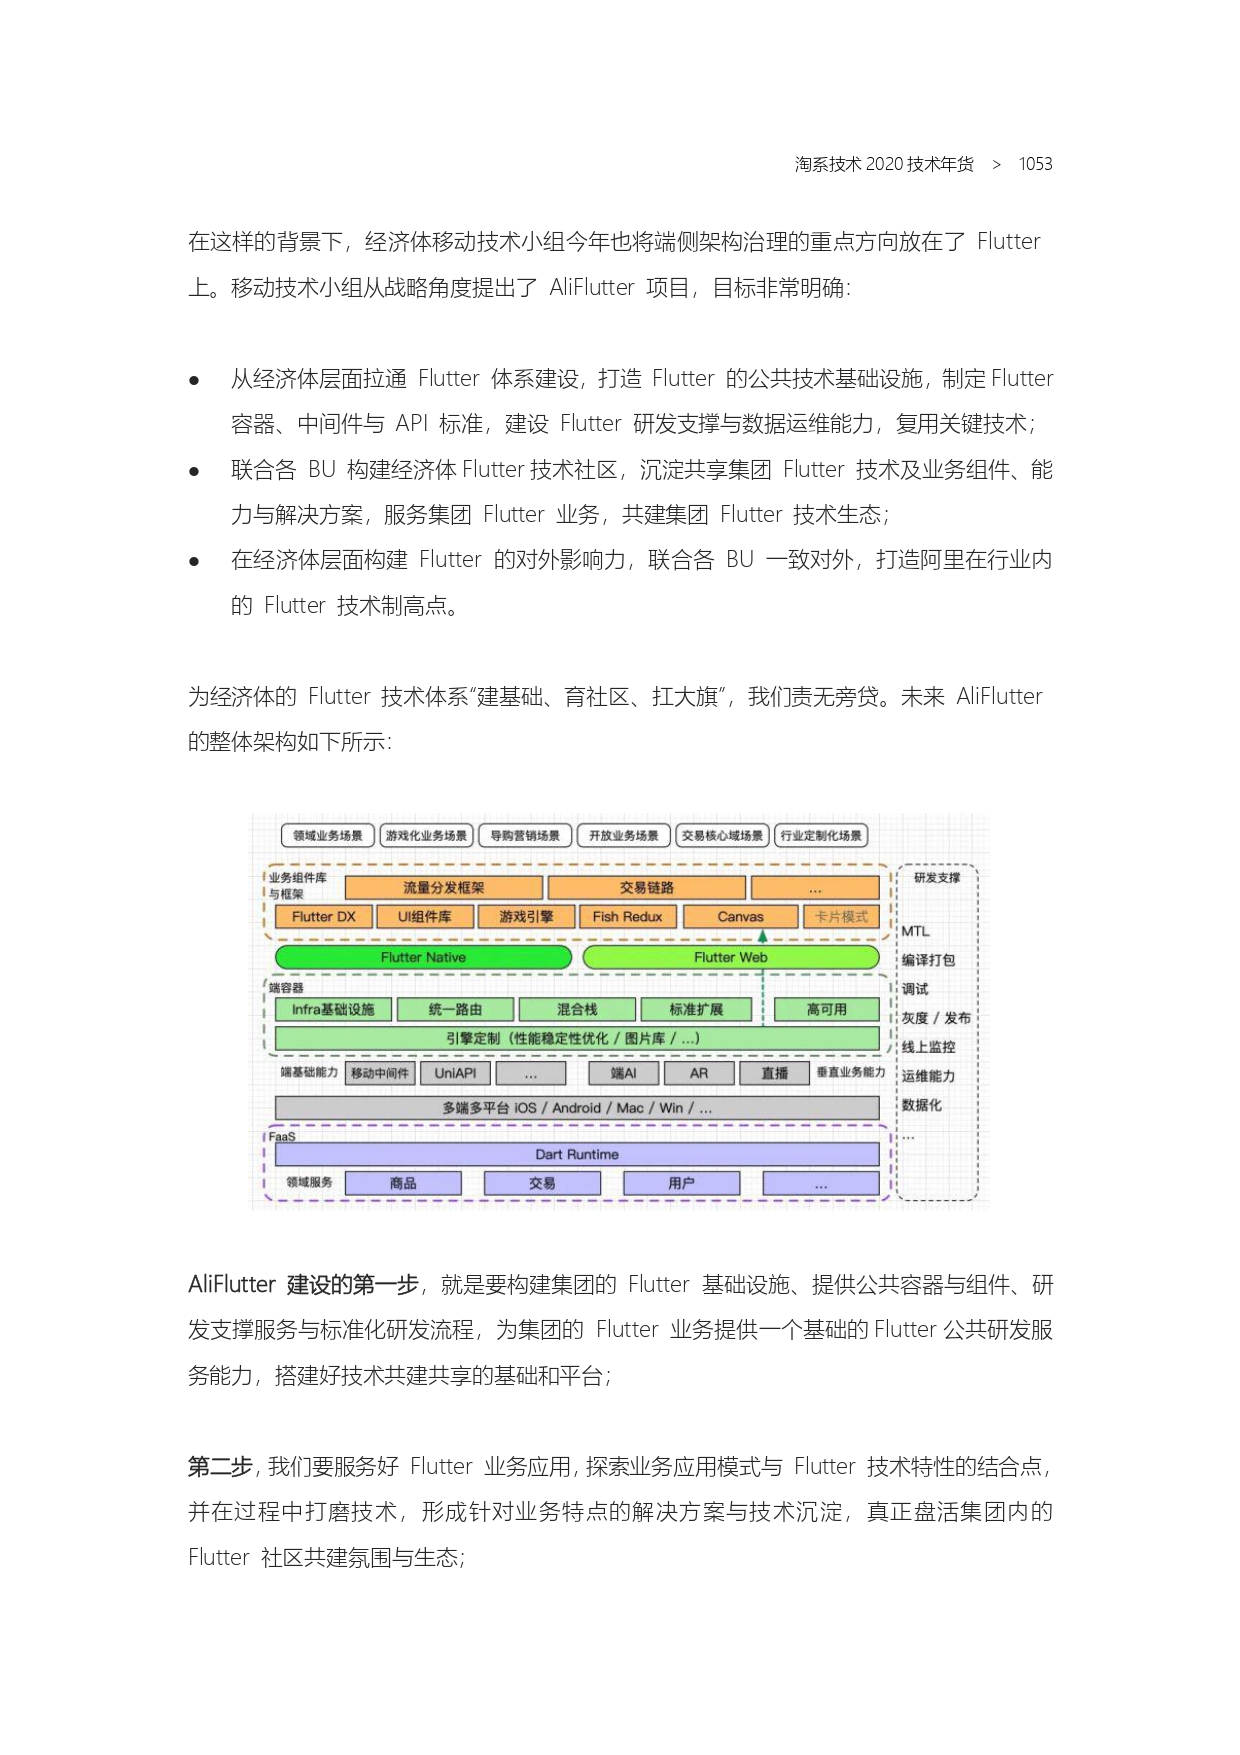 The Complete Works of Tao Technology 2020-571-1189-301-619_page-0183.jpg